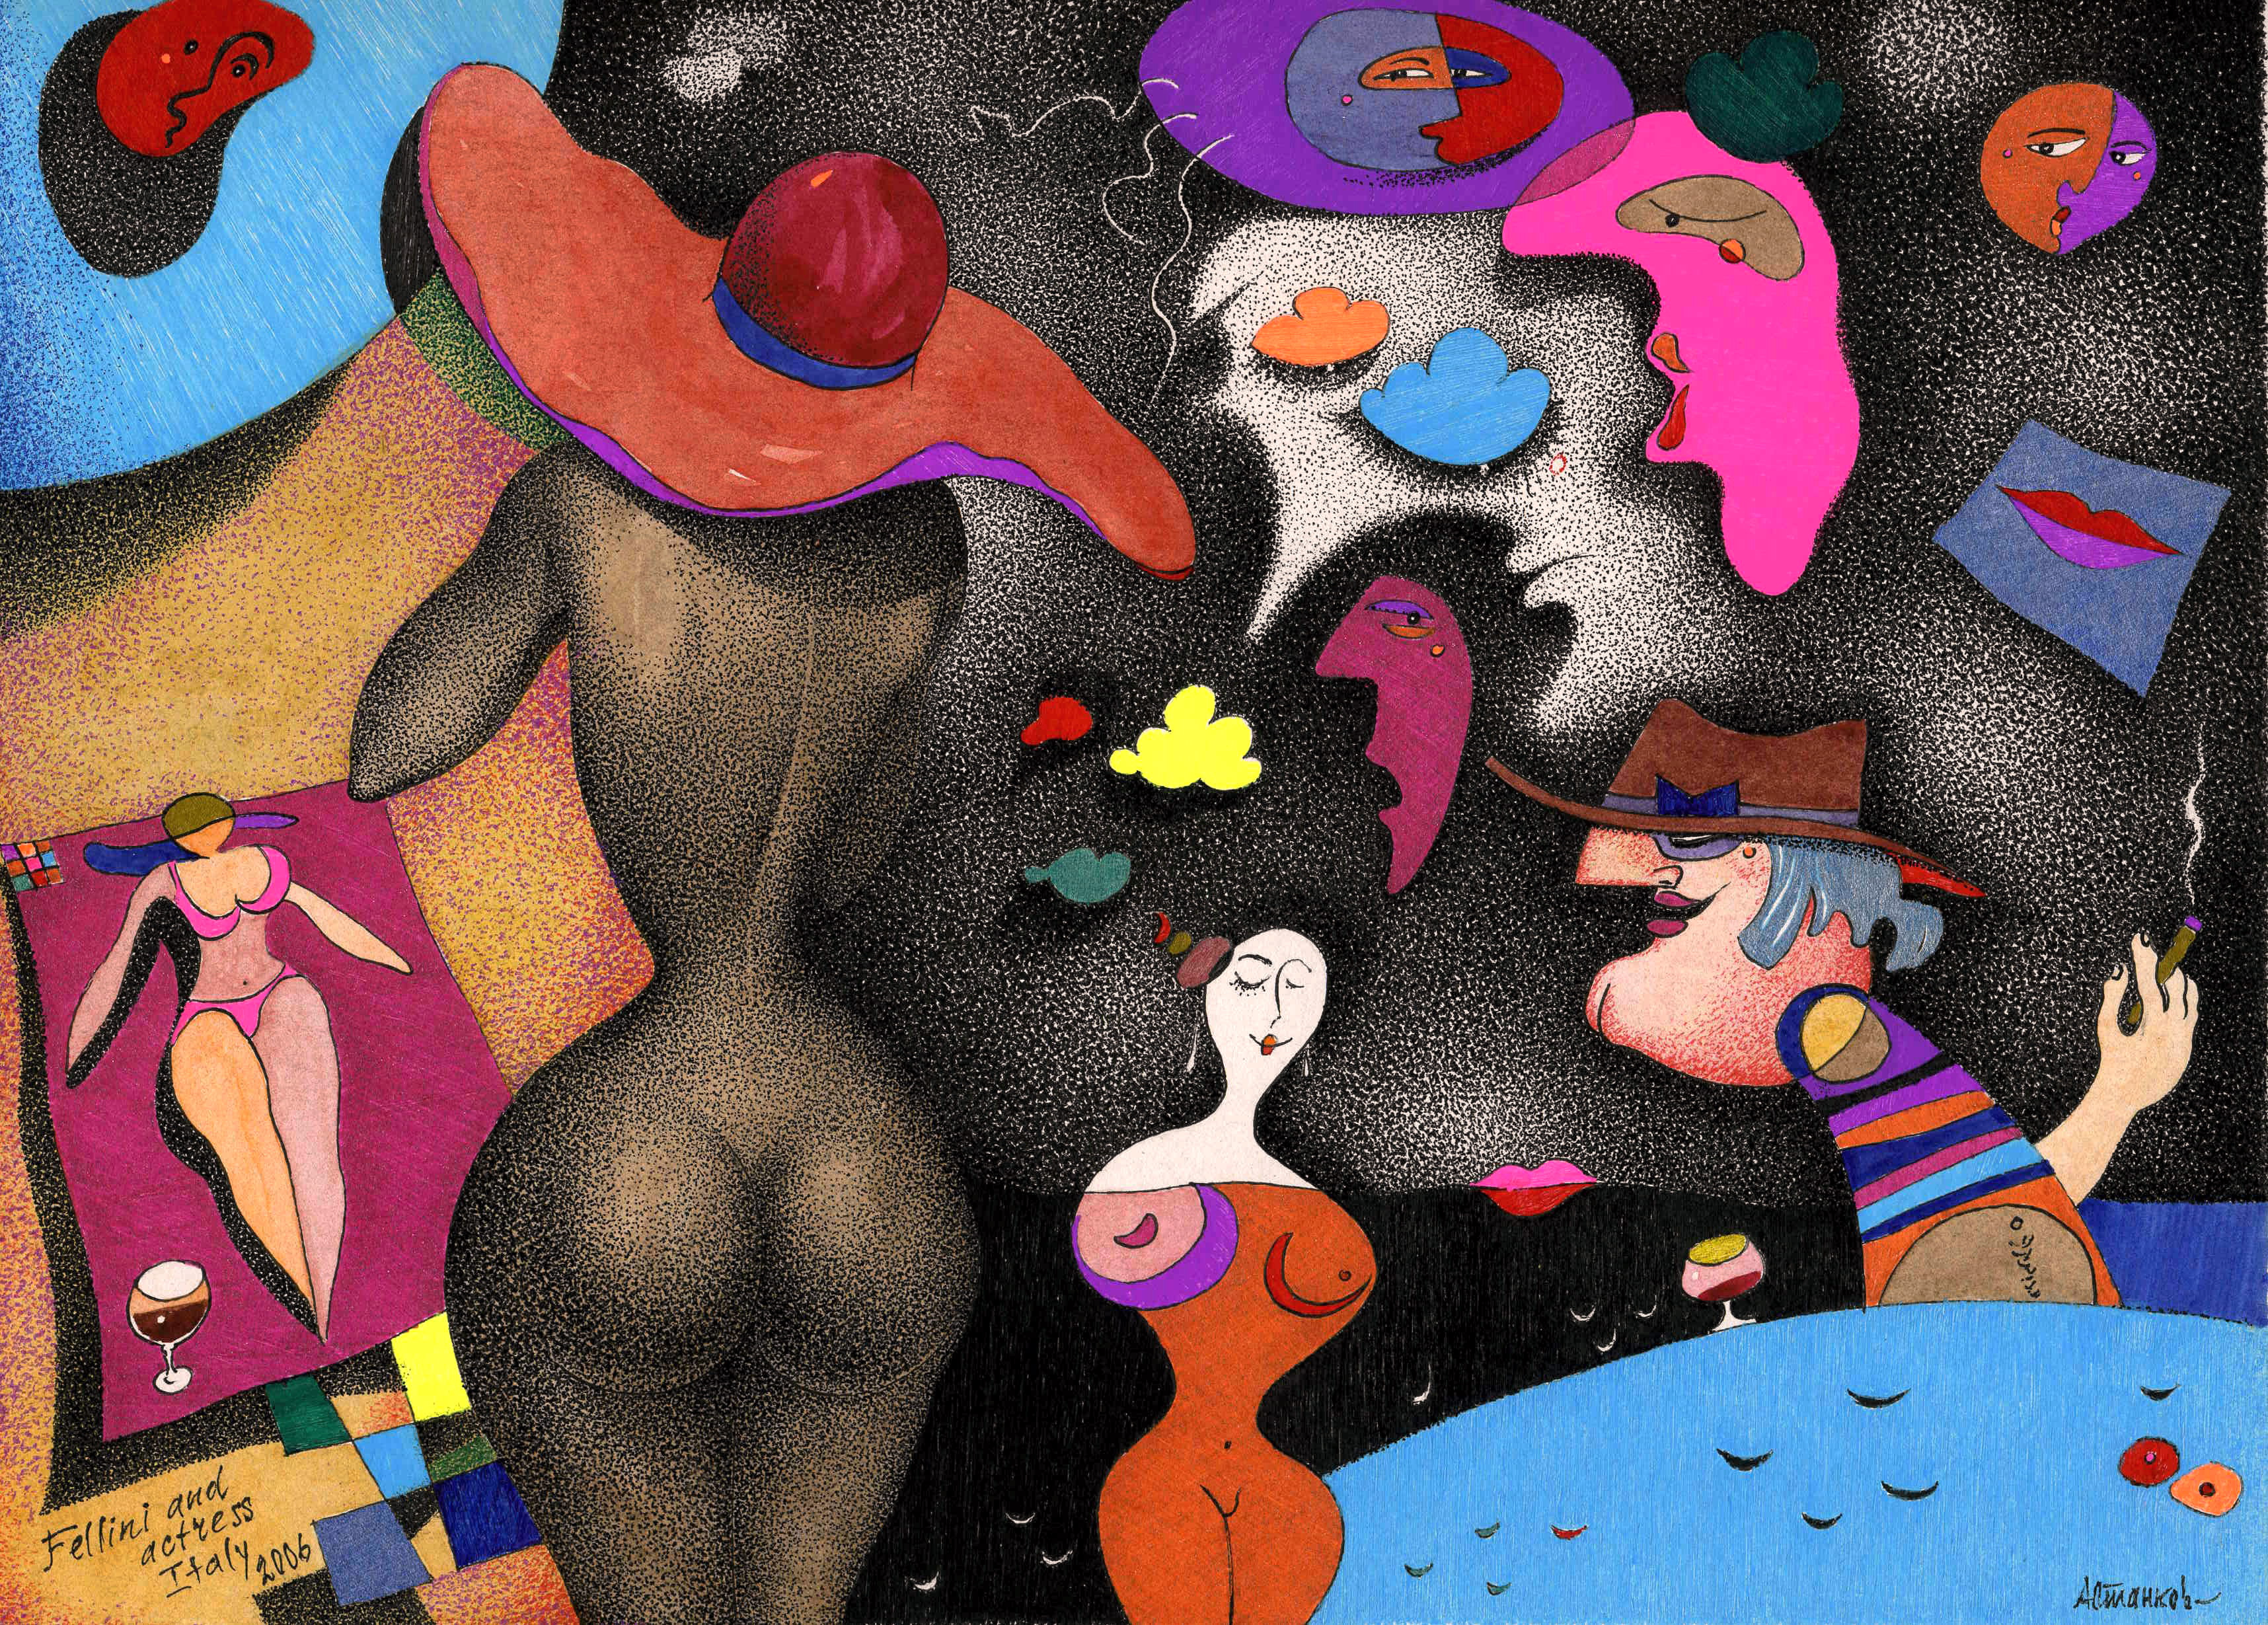 Fellini and The Actresses - 1, Alexander Astankov, Buy the painting Mixed media